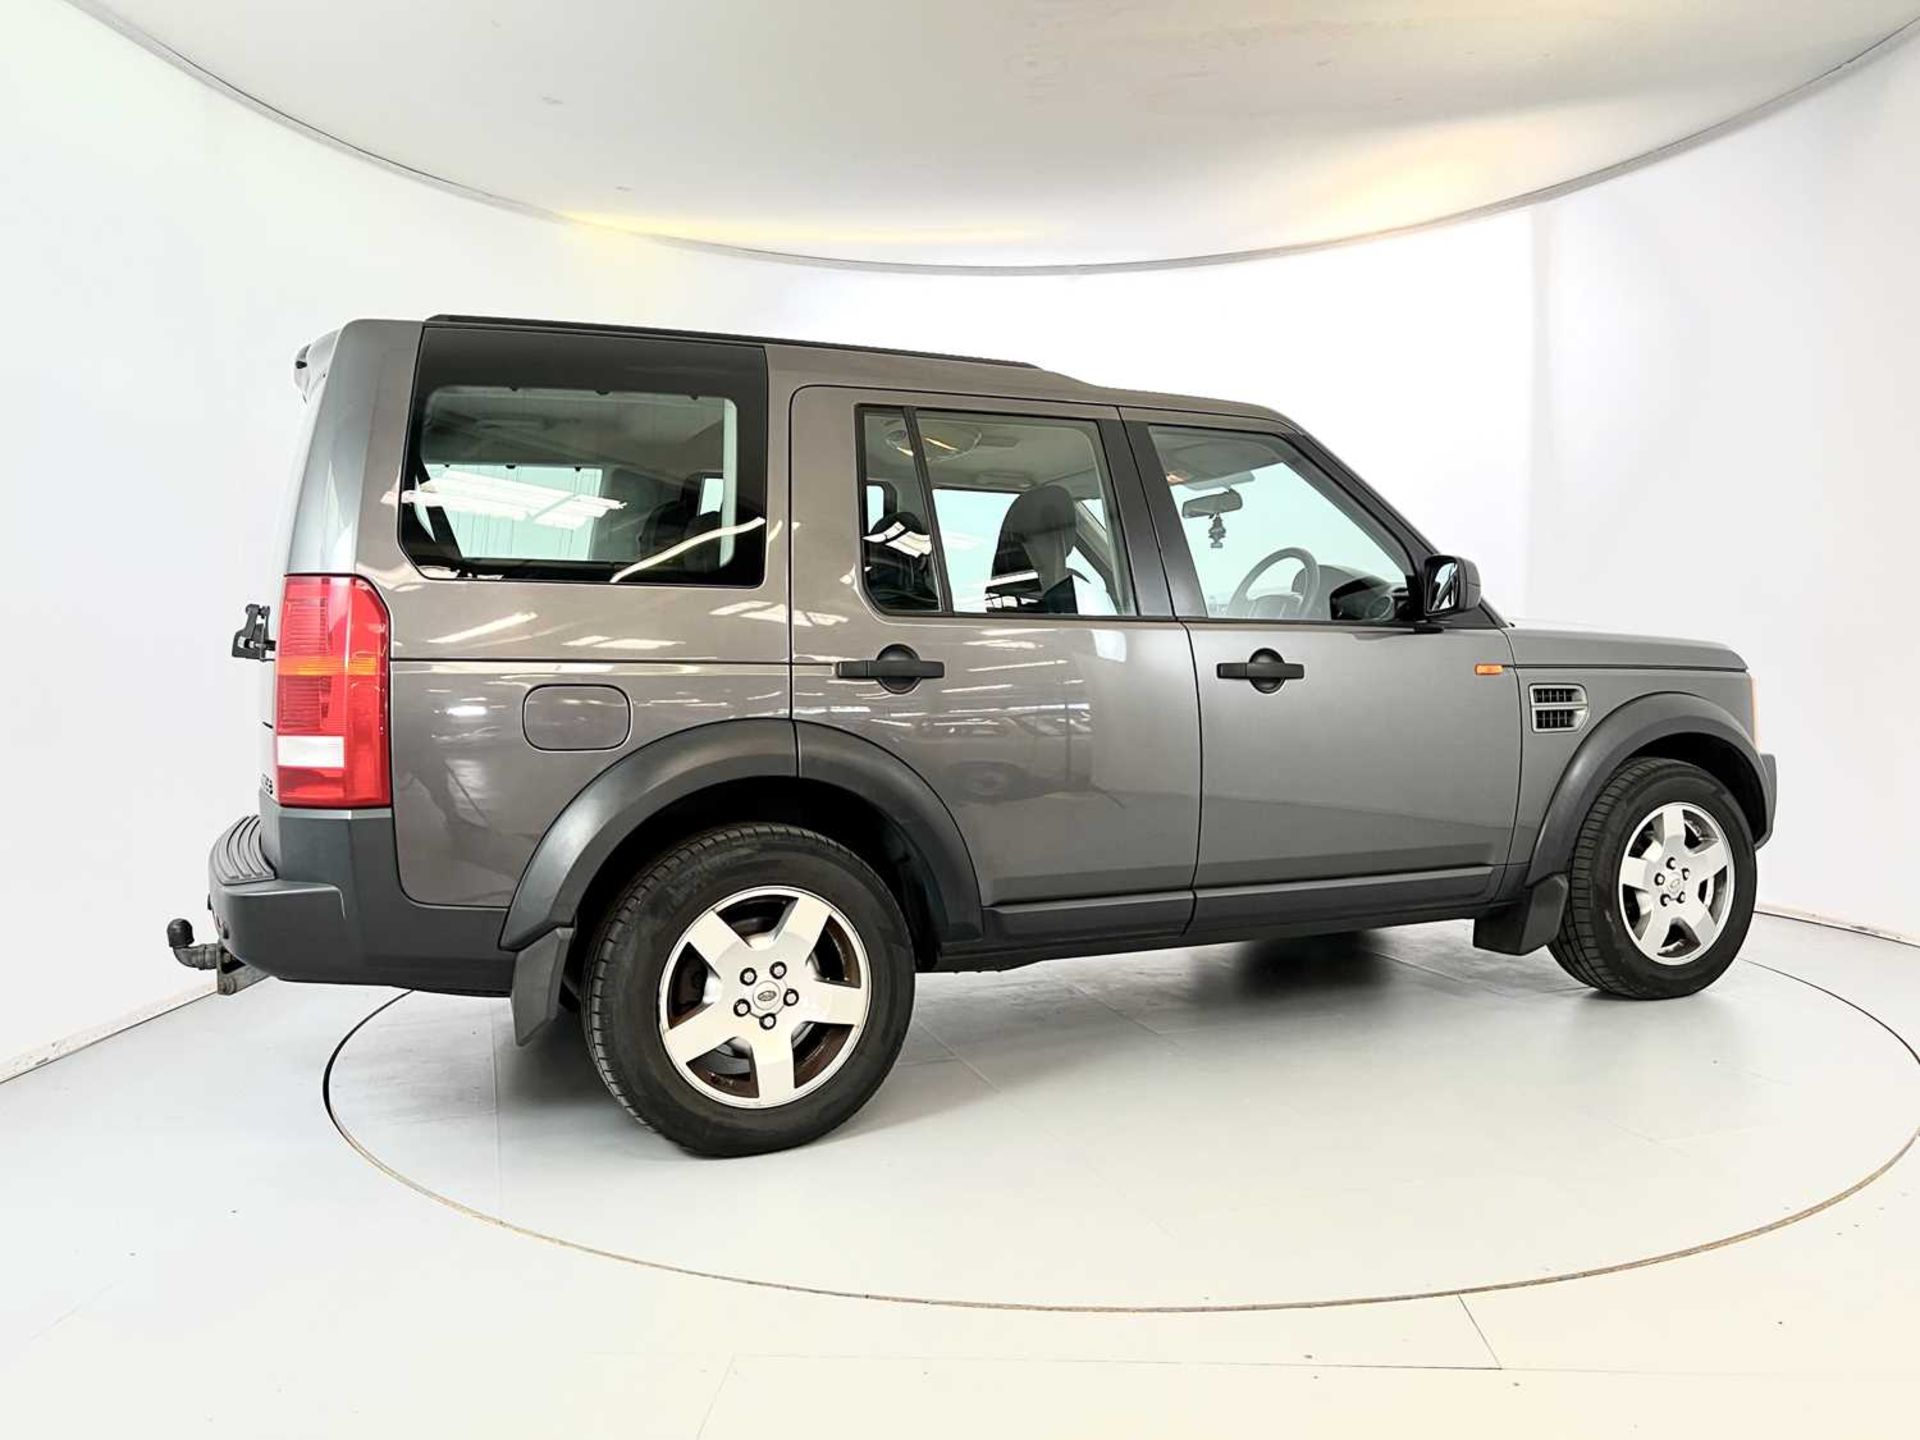 2005 Land Rover Discovery - Image 10 of 36